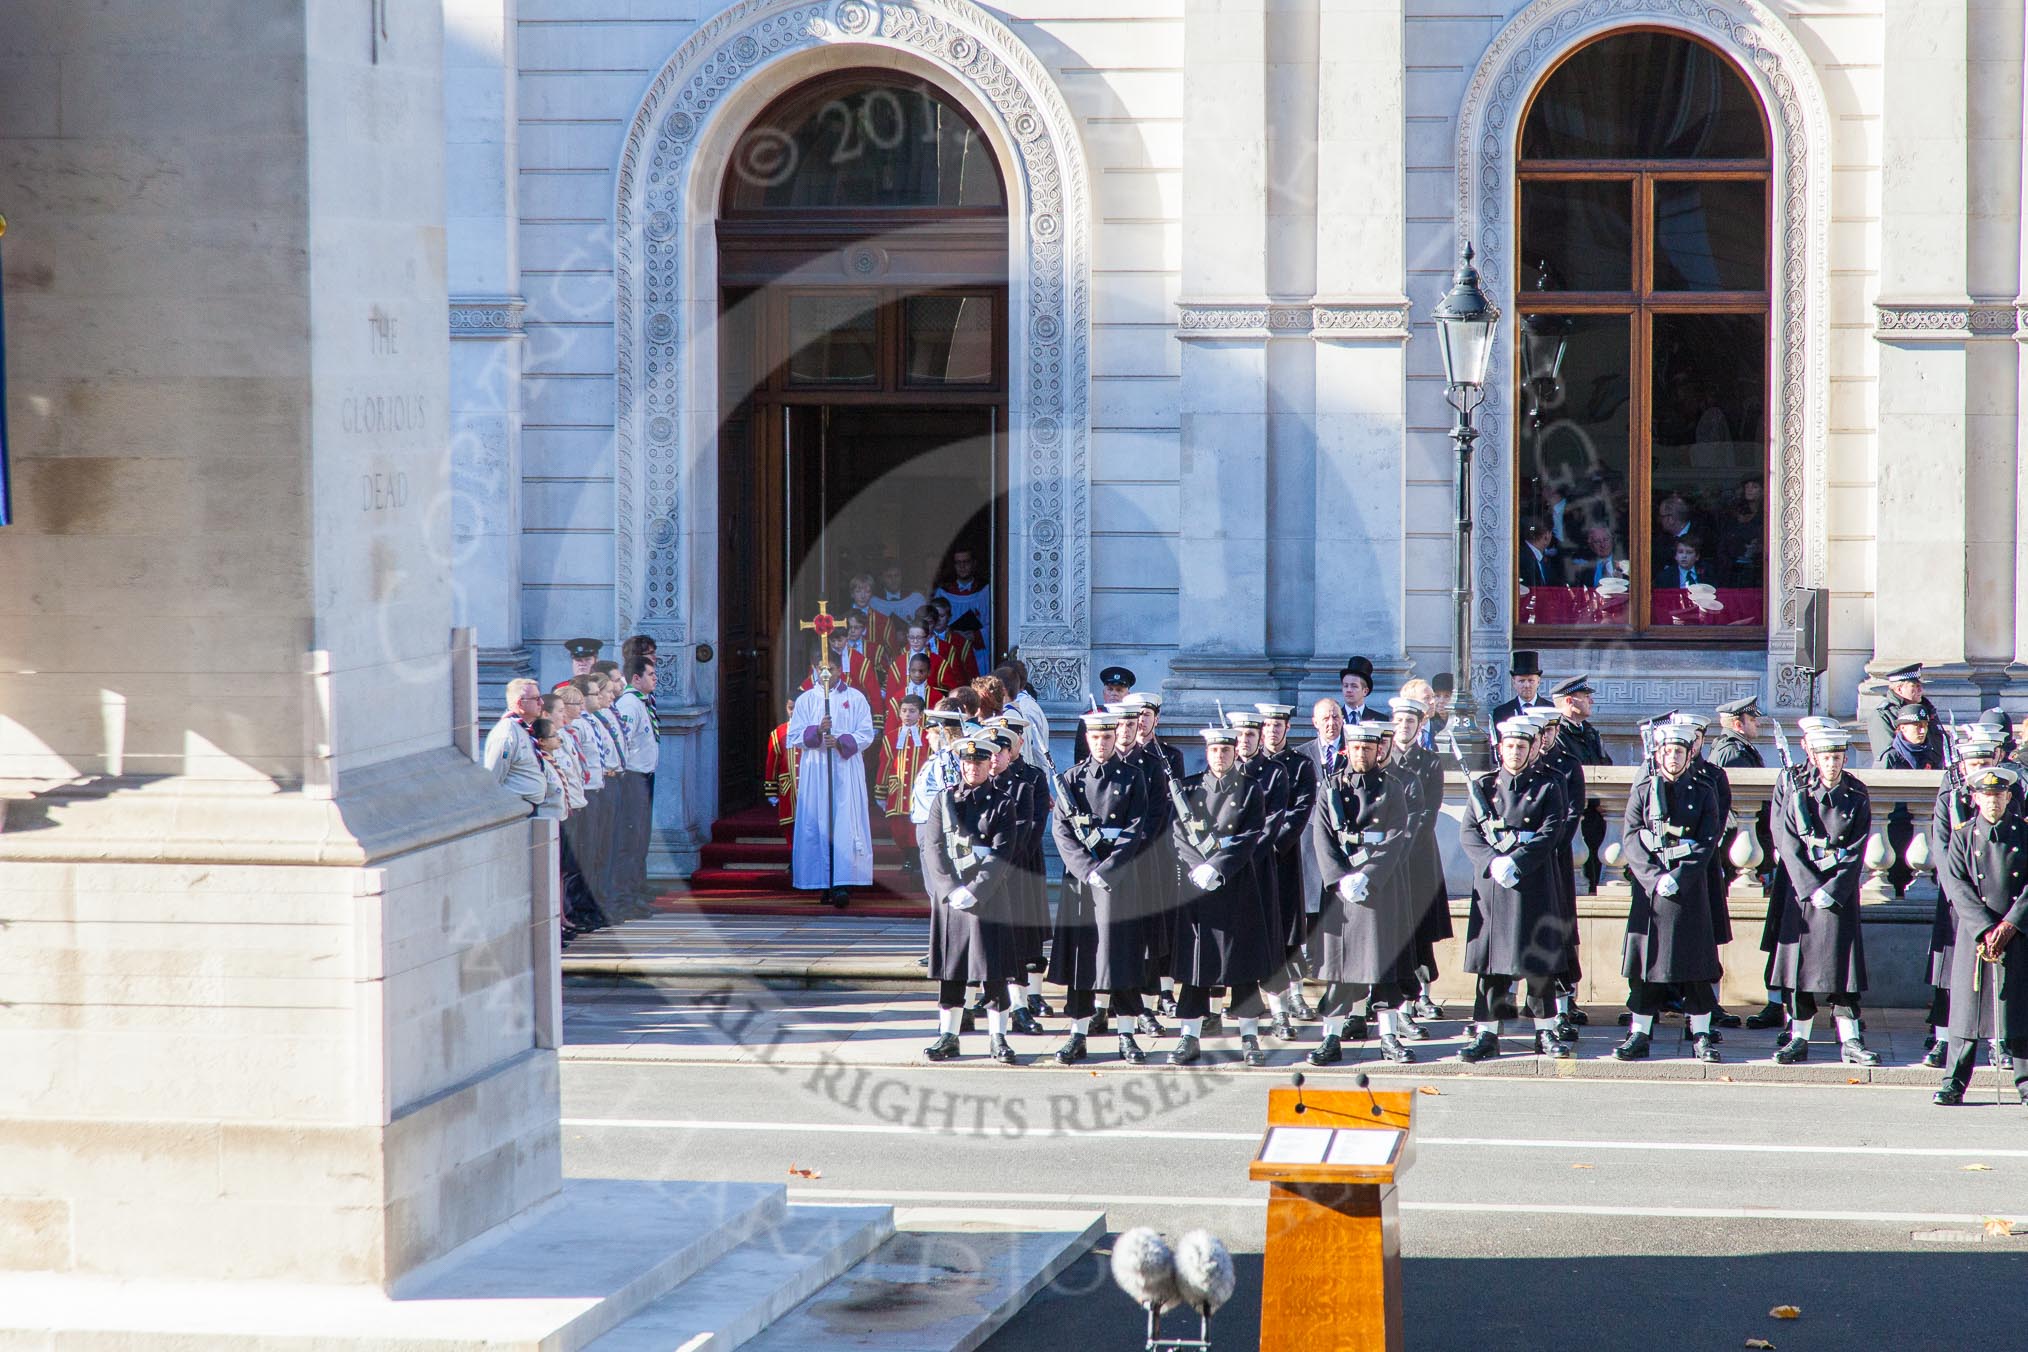 10:53am: The Choir, led by the Cross Bearer, emerges from the Foreign- and Commonwealth Building.